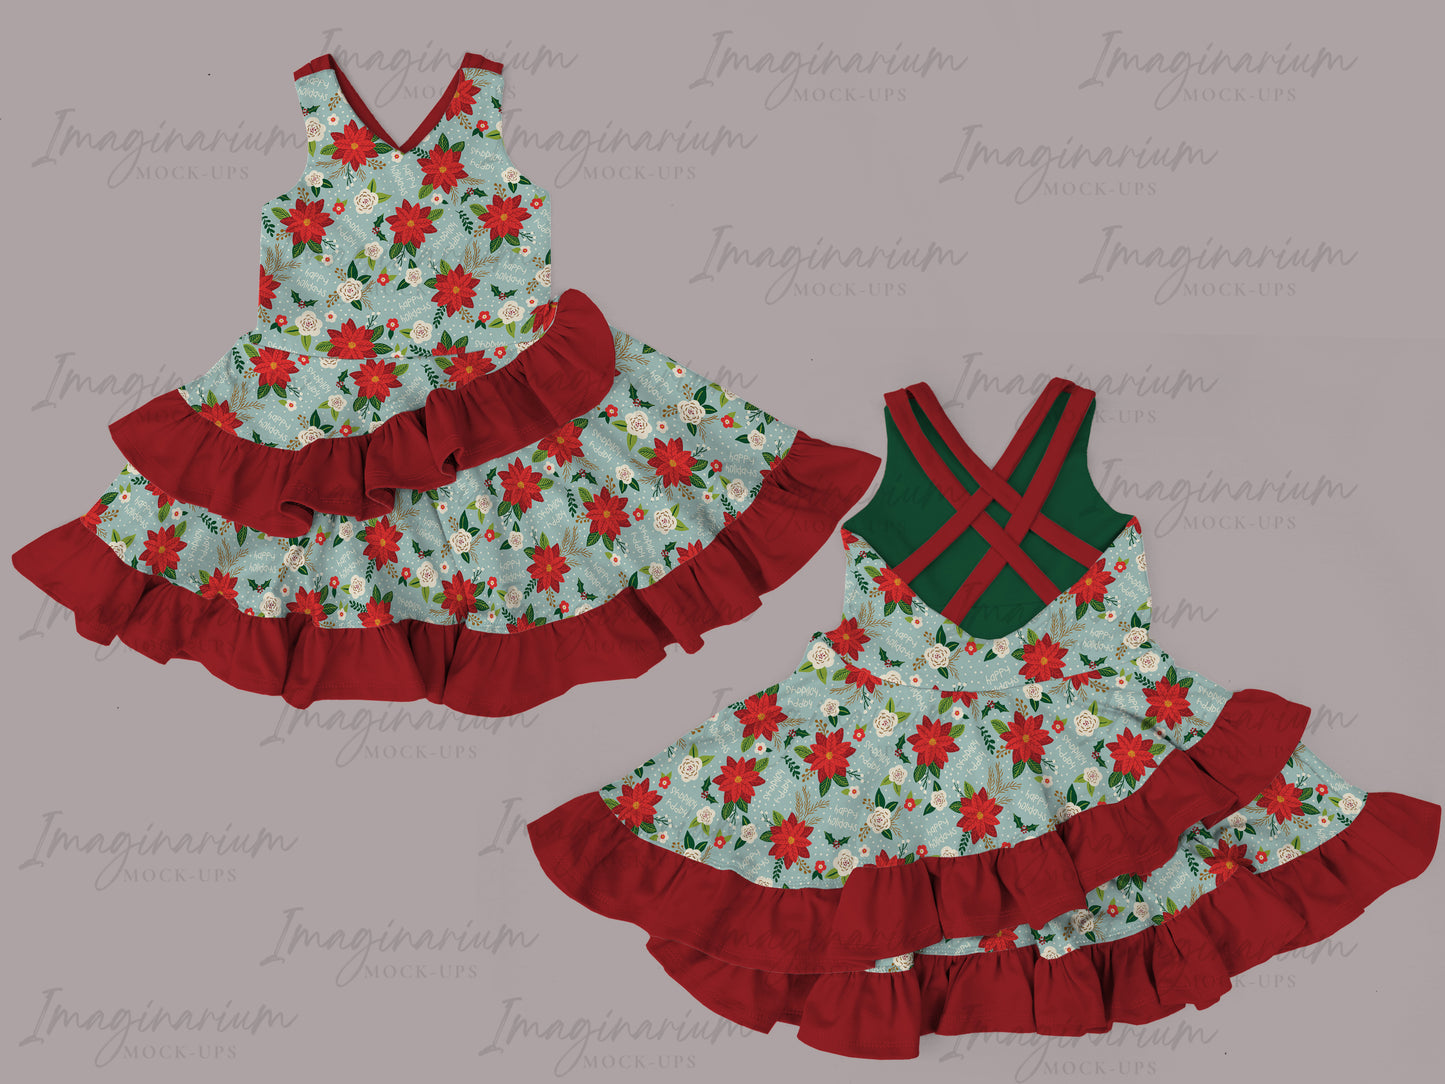 Tigerlily Multi Strap Double Flounce Skirt Dress Mock Up, Realistic Clothing Mockup for Photoshop and Procreate